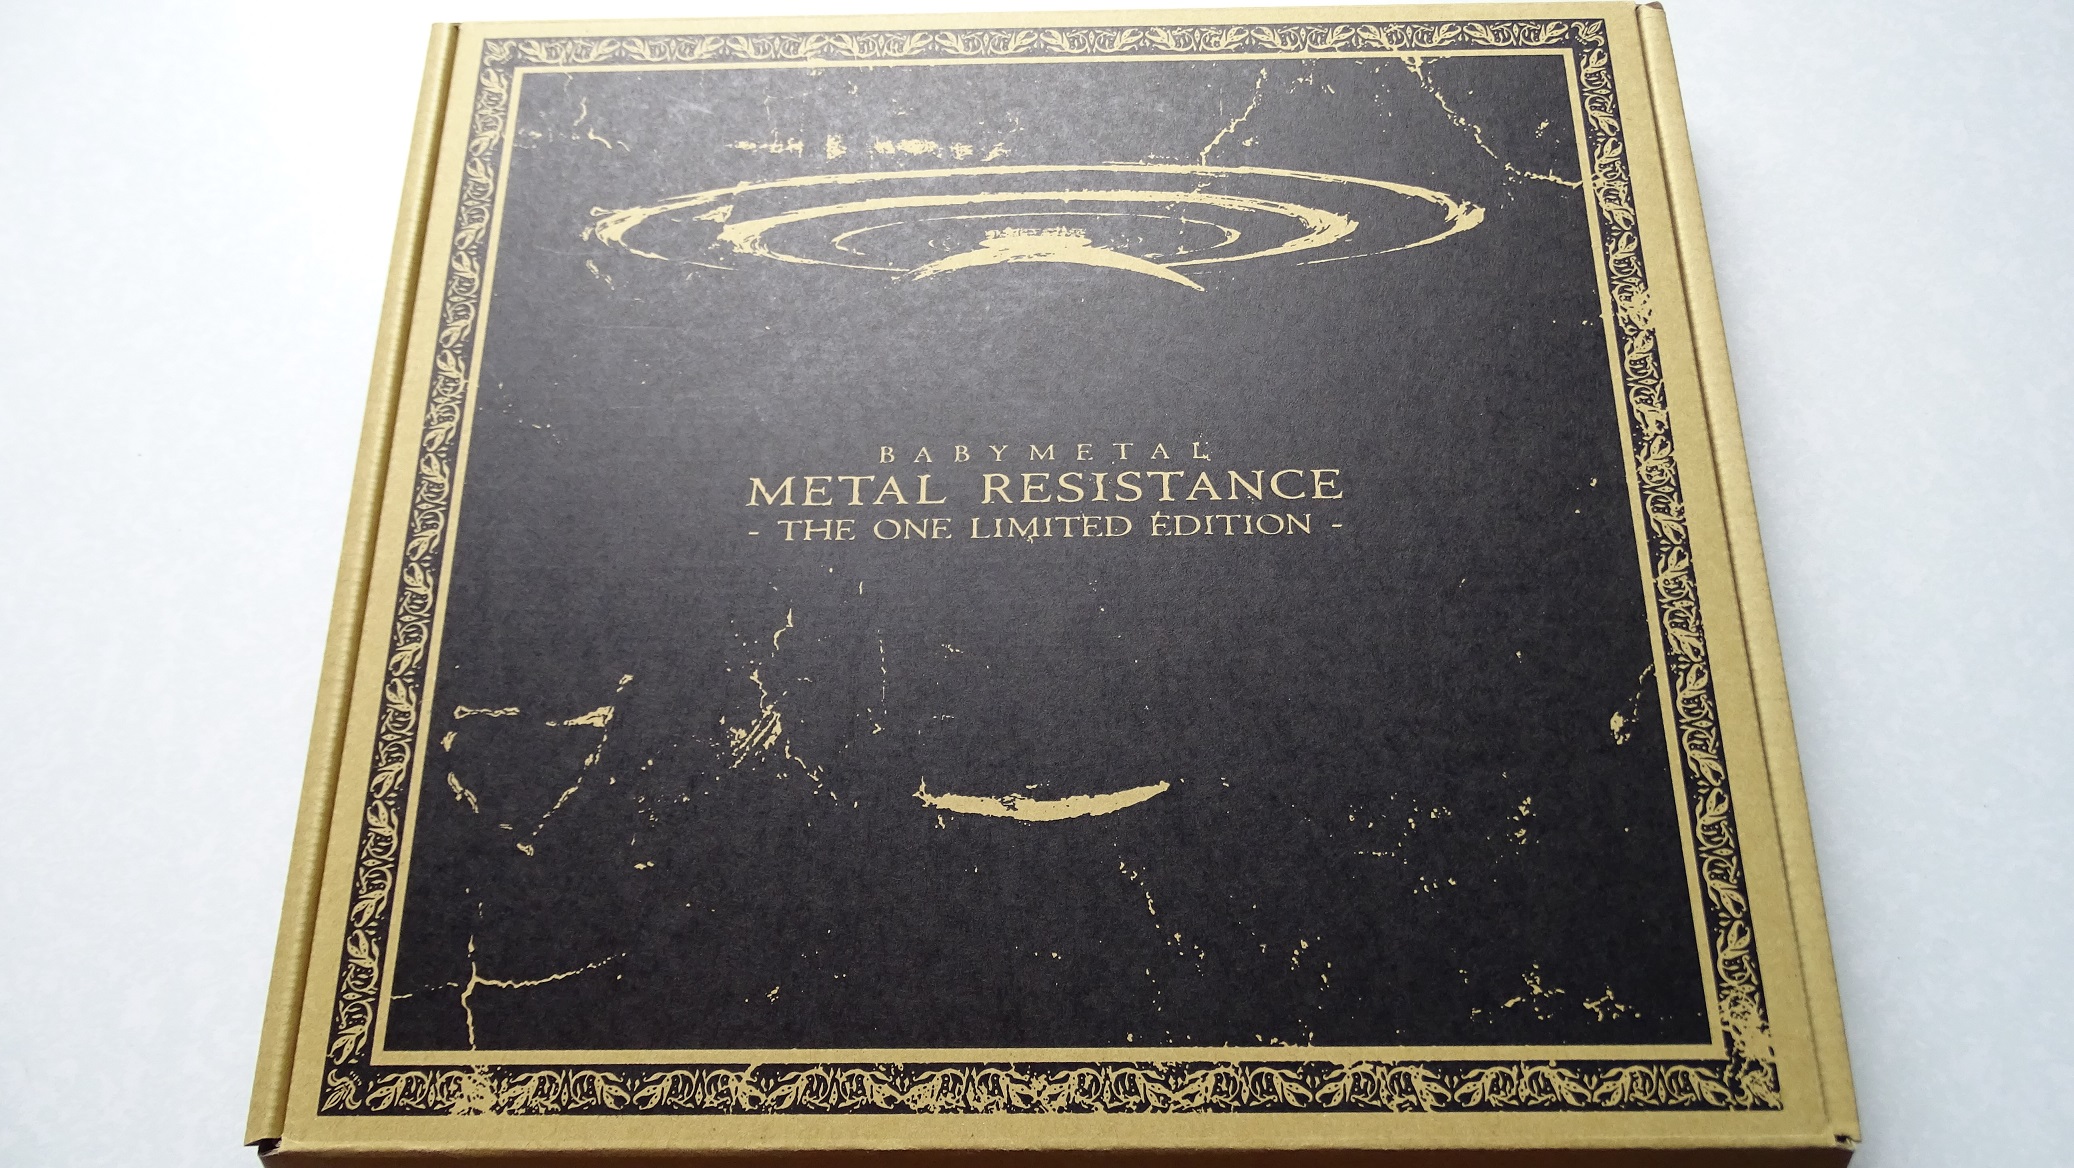 BABYMETAL Metal Resistance The ONE Limited Edition Review